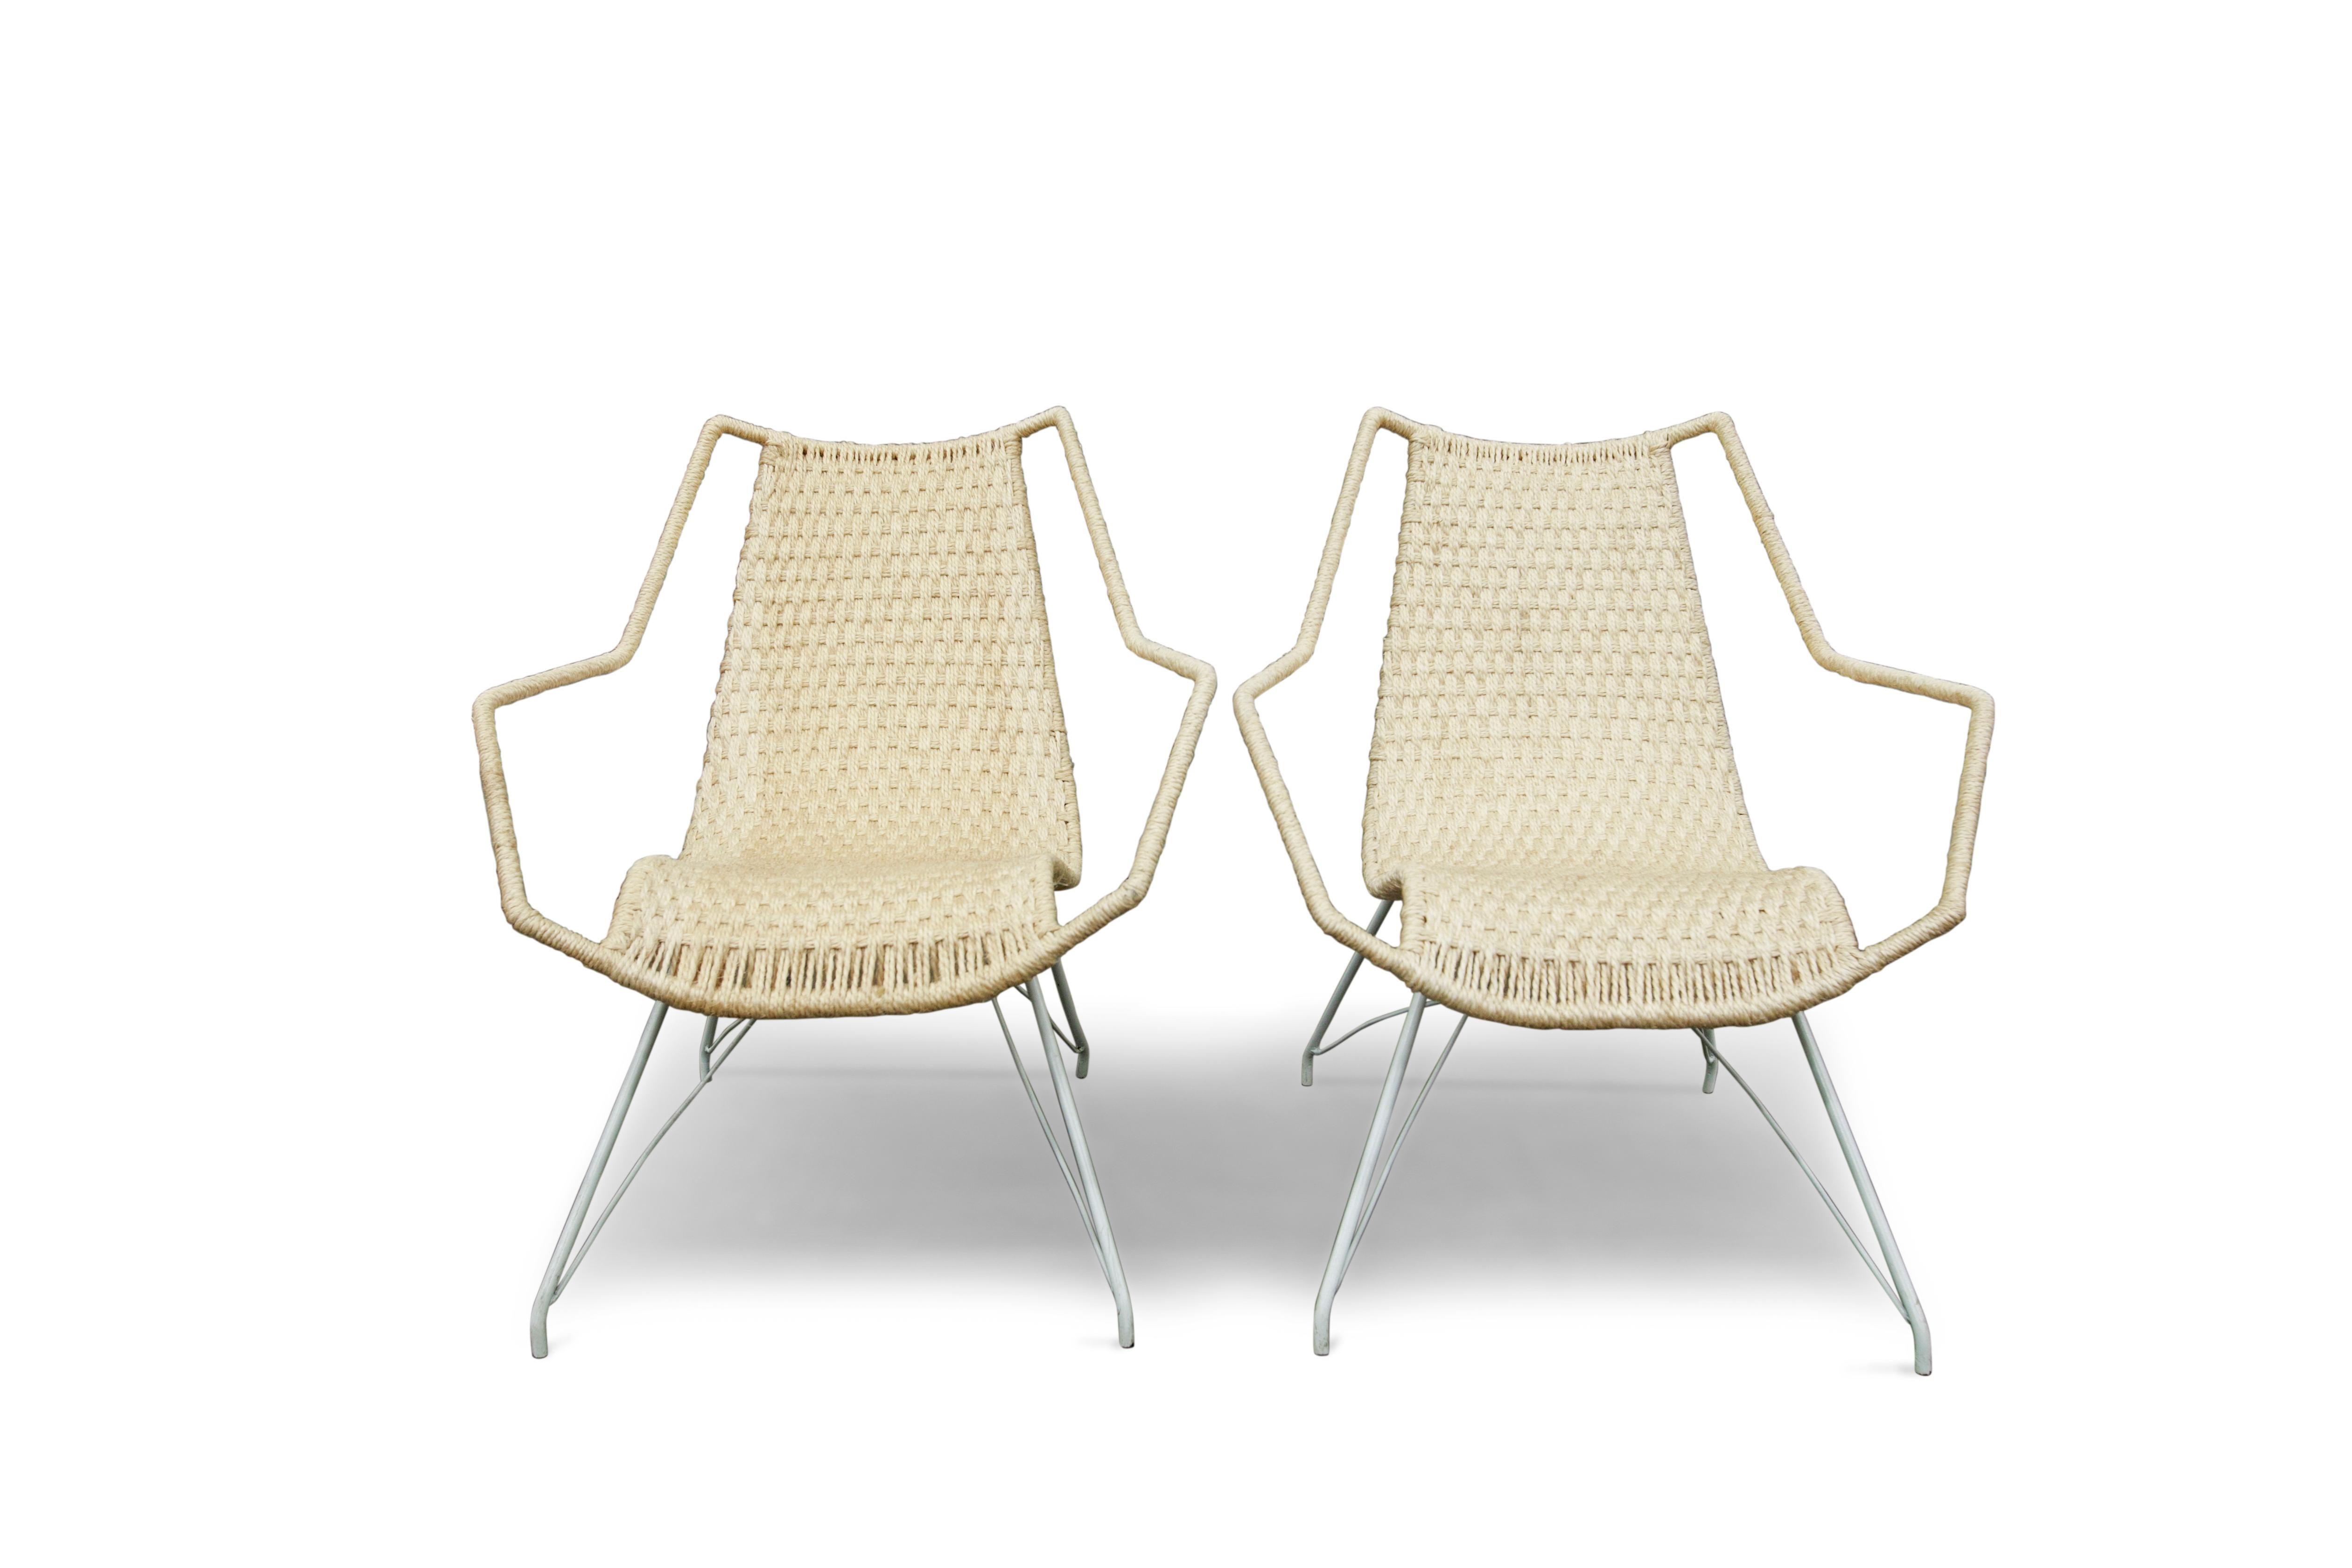 Available today, this Brazilian Modern armchair set in steel & hand woven cotton fiber designed by Carlo Hauner in the fifties is a masterpiece of Craft and design!

This gorgeous pair features a steel structure painted in white and a body hand